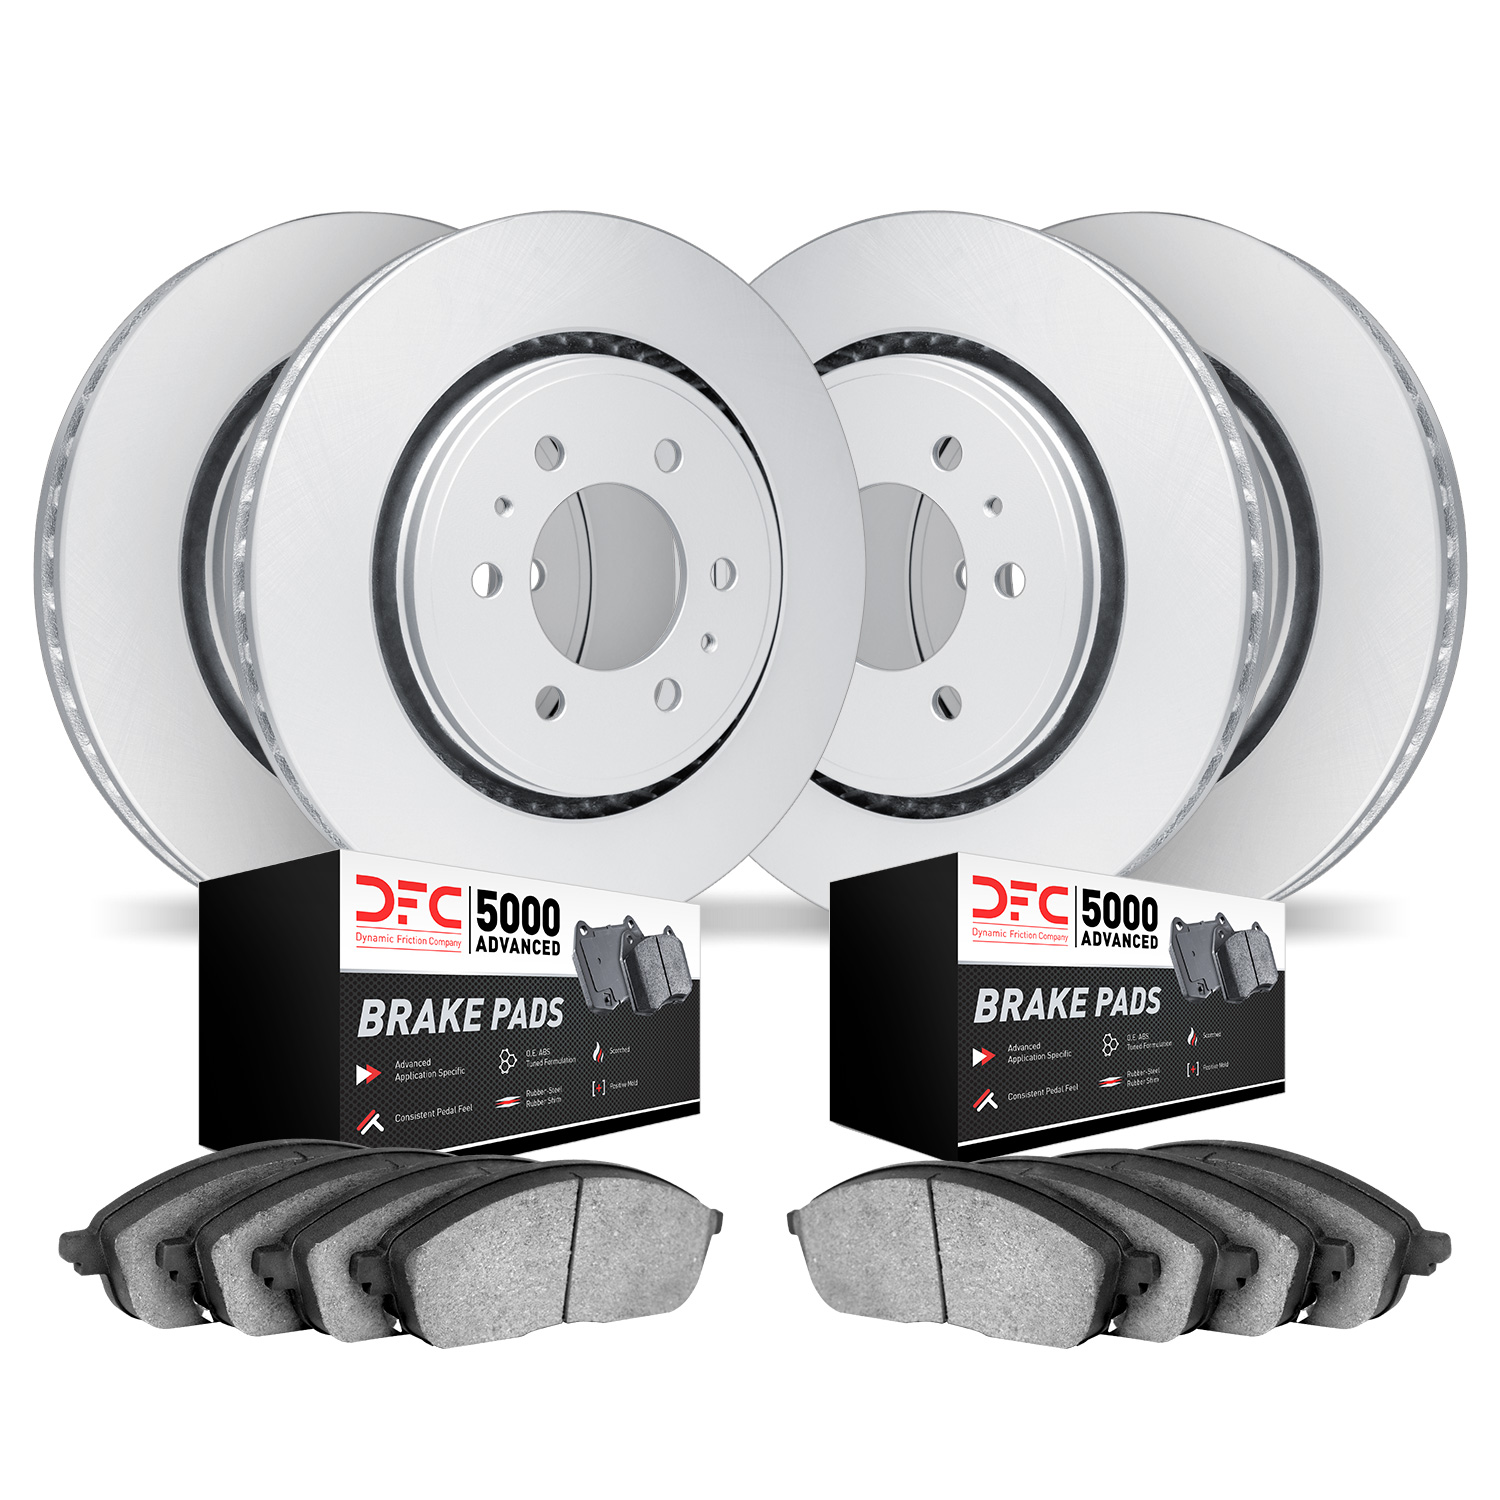 4504-54291 Geospec Brake Rotors w/5000 Advanced Brake Pads Kit, Fits Select Ford/Lincoln/Mercury/Mazda, Position: Front and Rear